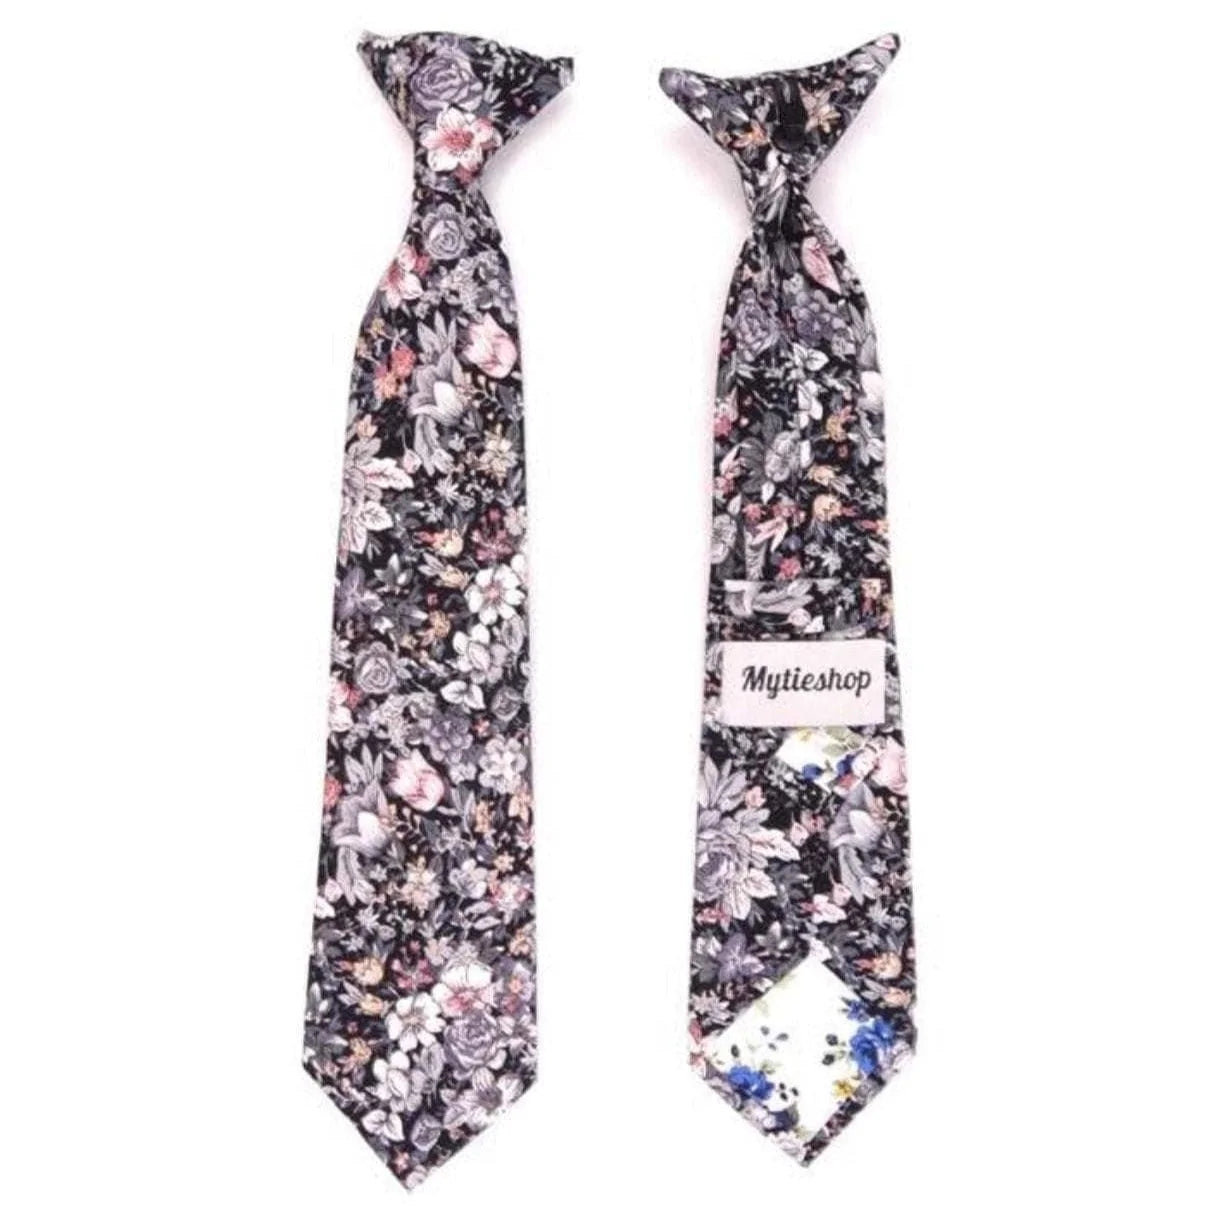 Gray Floral Kids Clip On Ties GABE - MYTIESHOP-Gray Floral Kids Clip On Ties Material:Cotton Blend Approx Size: Max width: 6.5 cm / 2.4 inches 9-24 months 26 CM2-5 years 31 CM9-11 Years 43 CM Color: Gray-Mytieshop